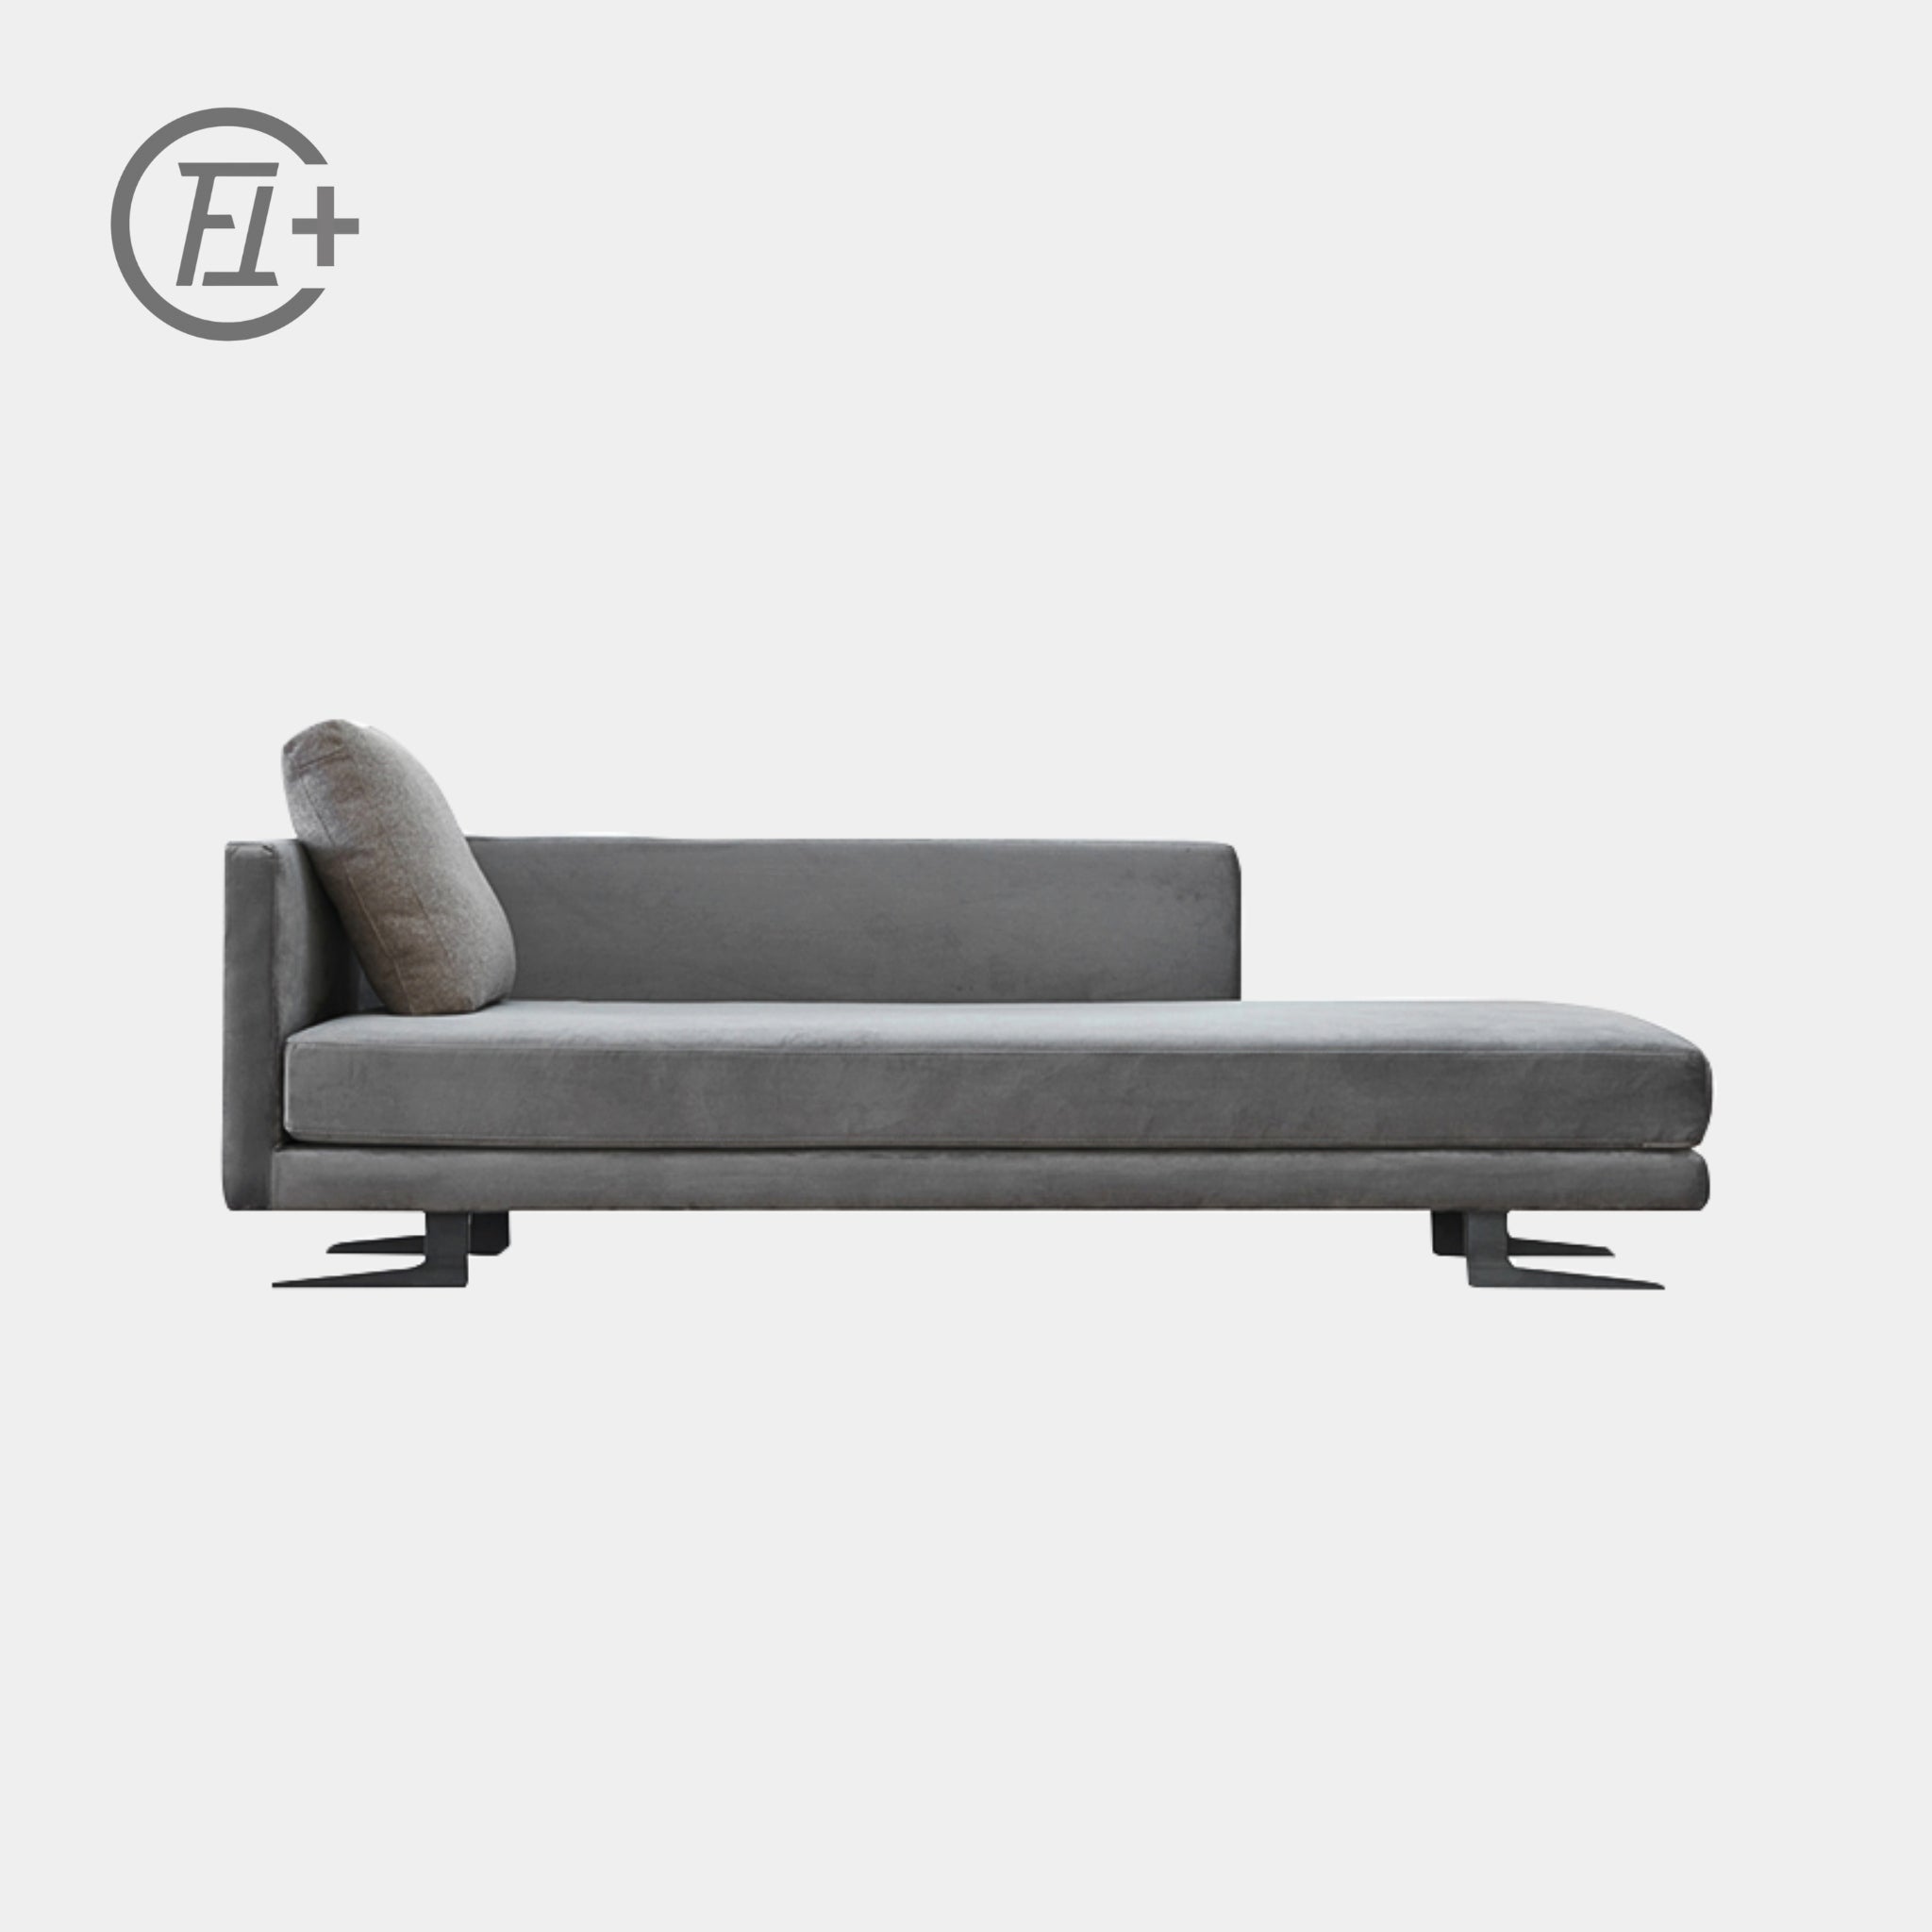 The Feelter  Bologna Minimalist Chaise Lounge